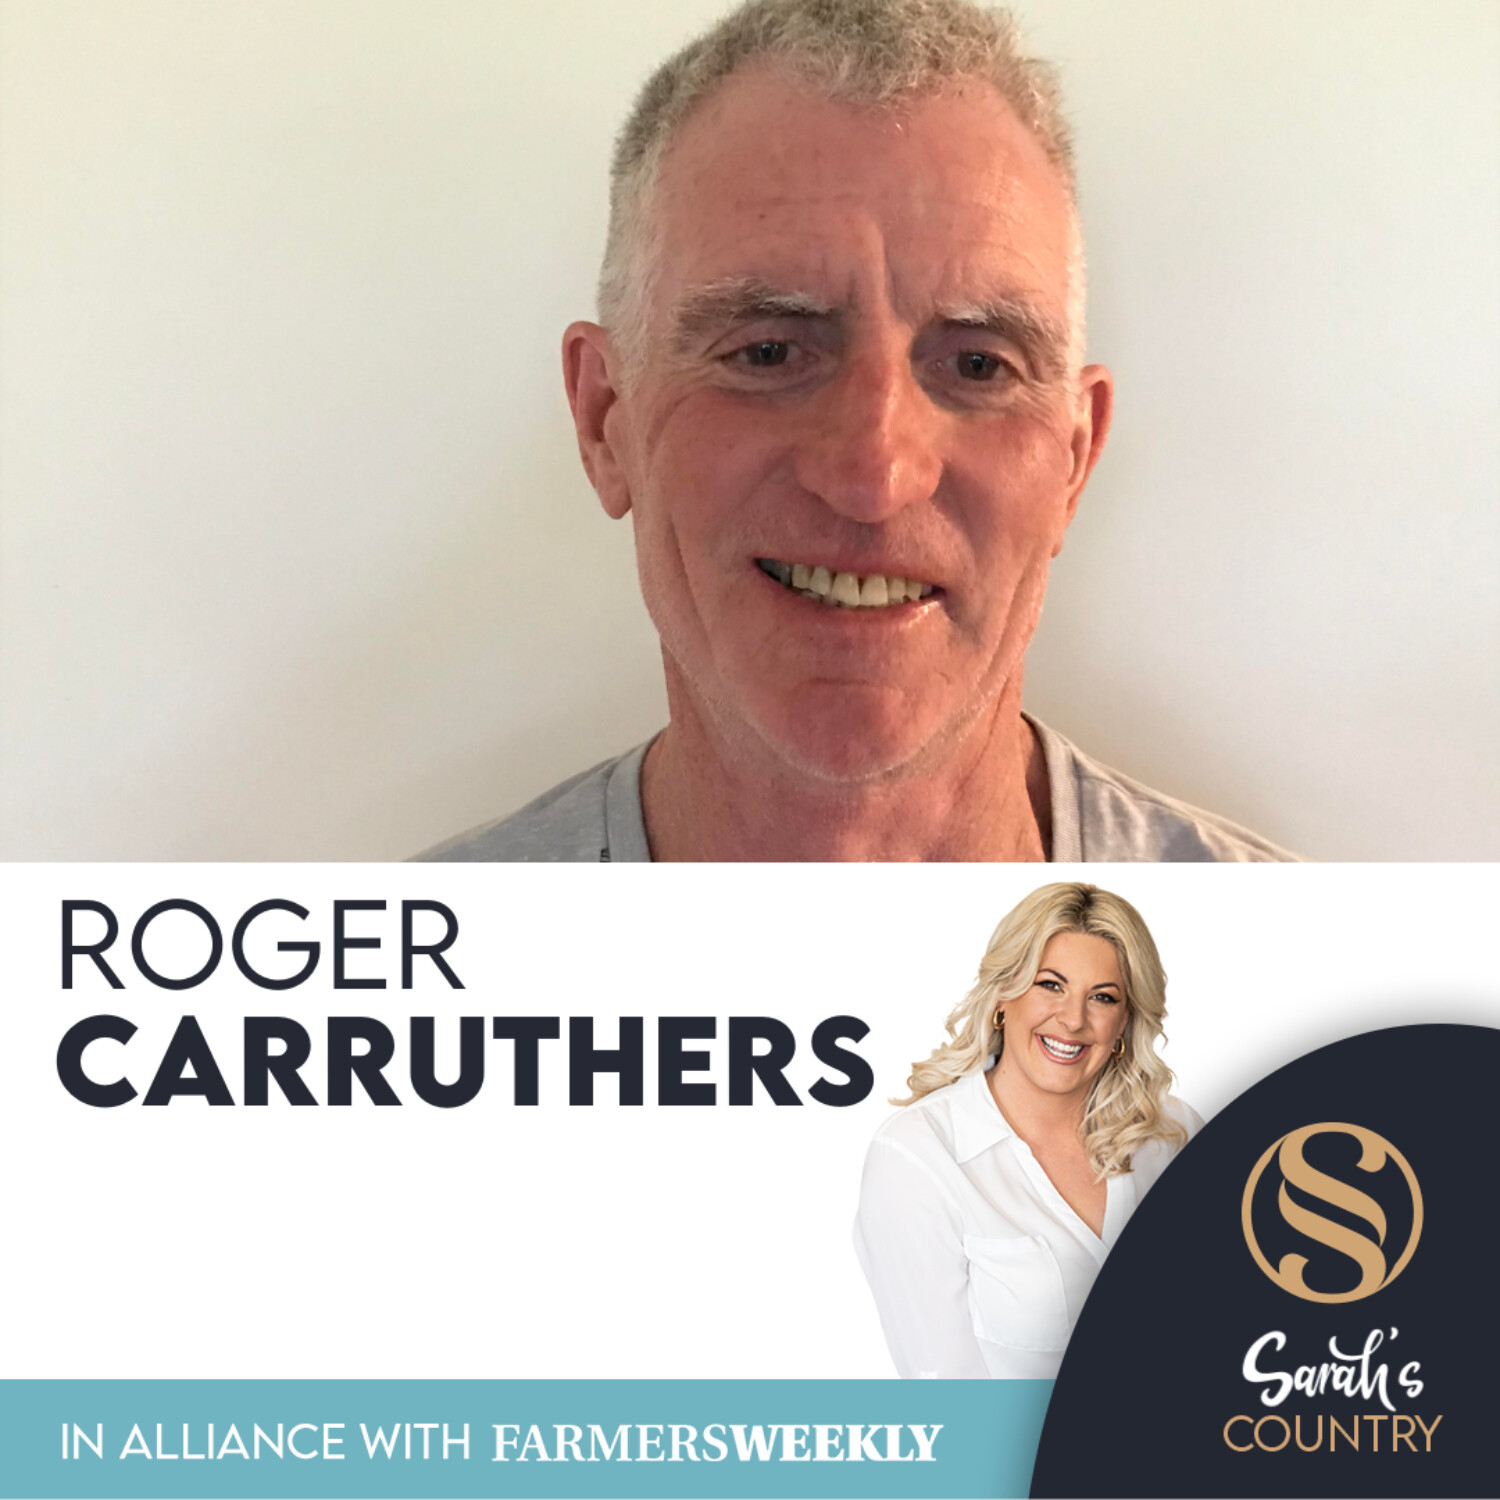 Roger Carruthers | “Plant-based factory to bring farmer opportunities”